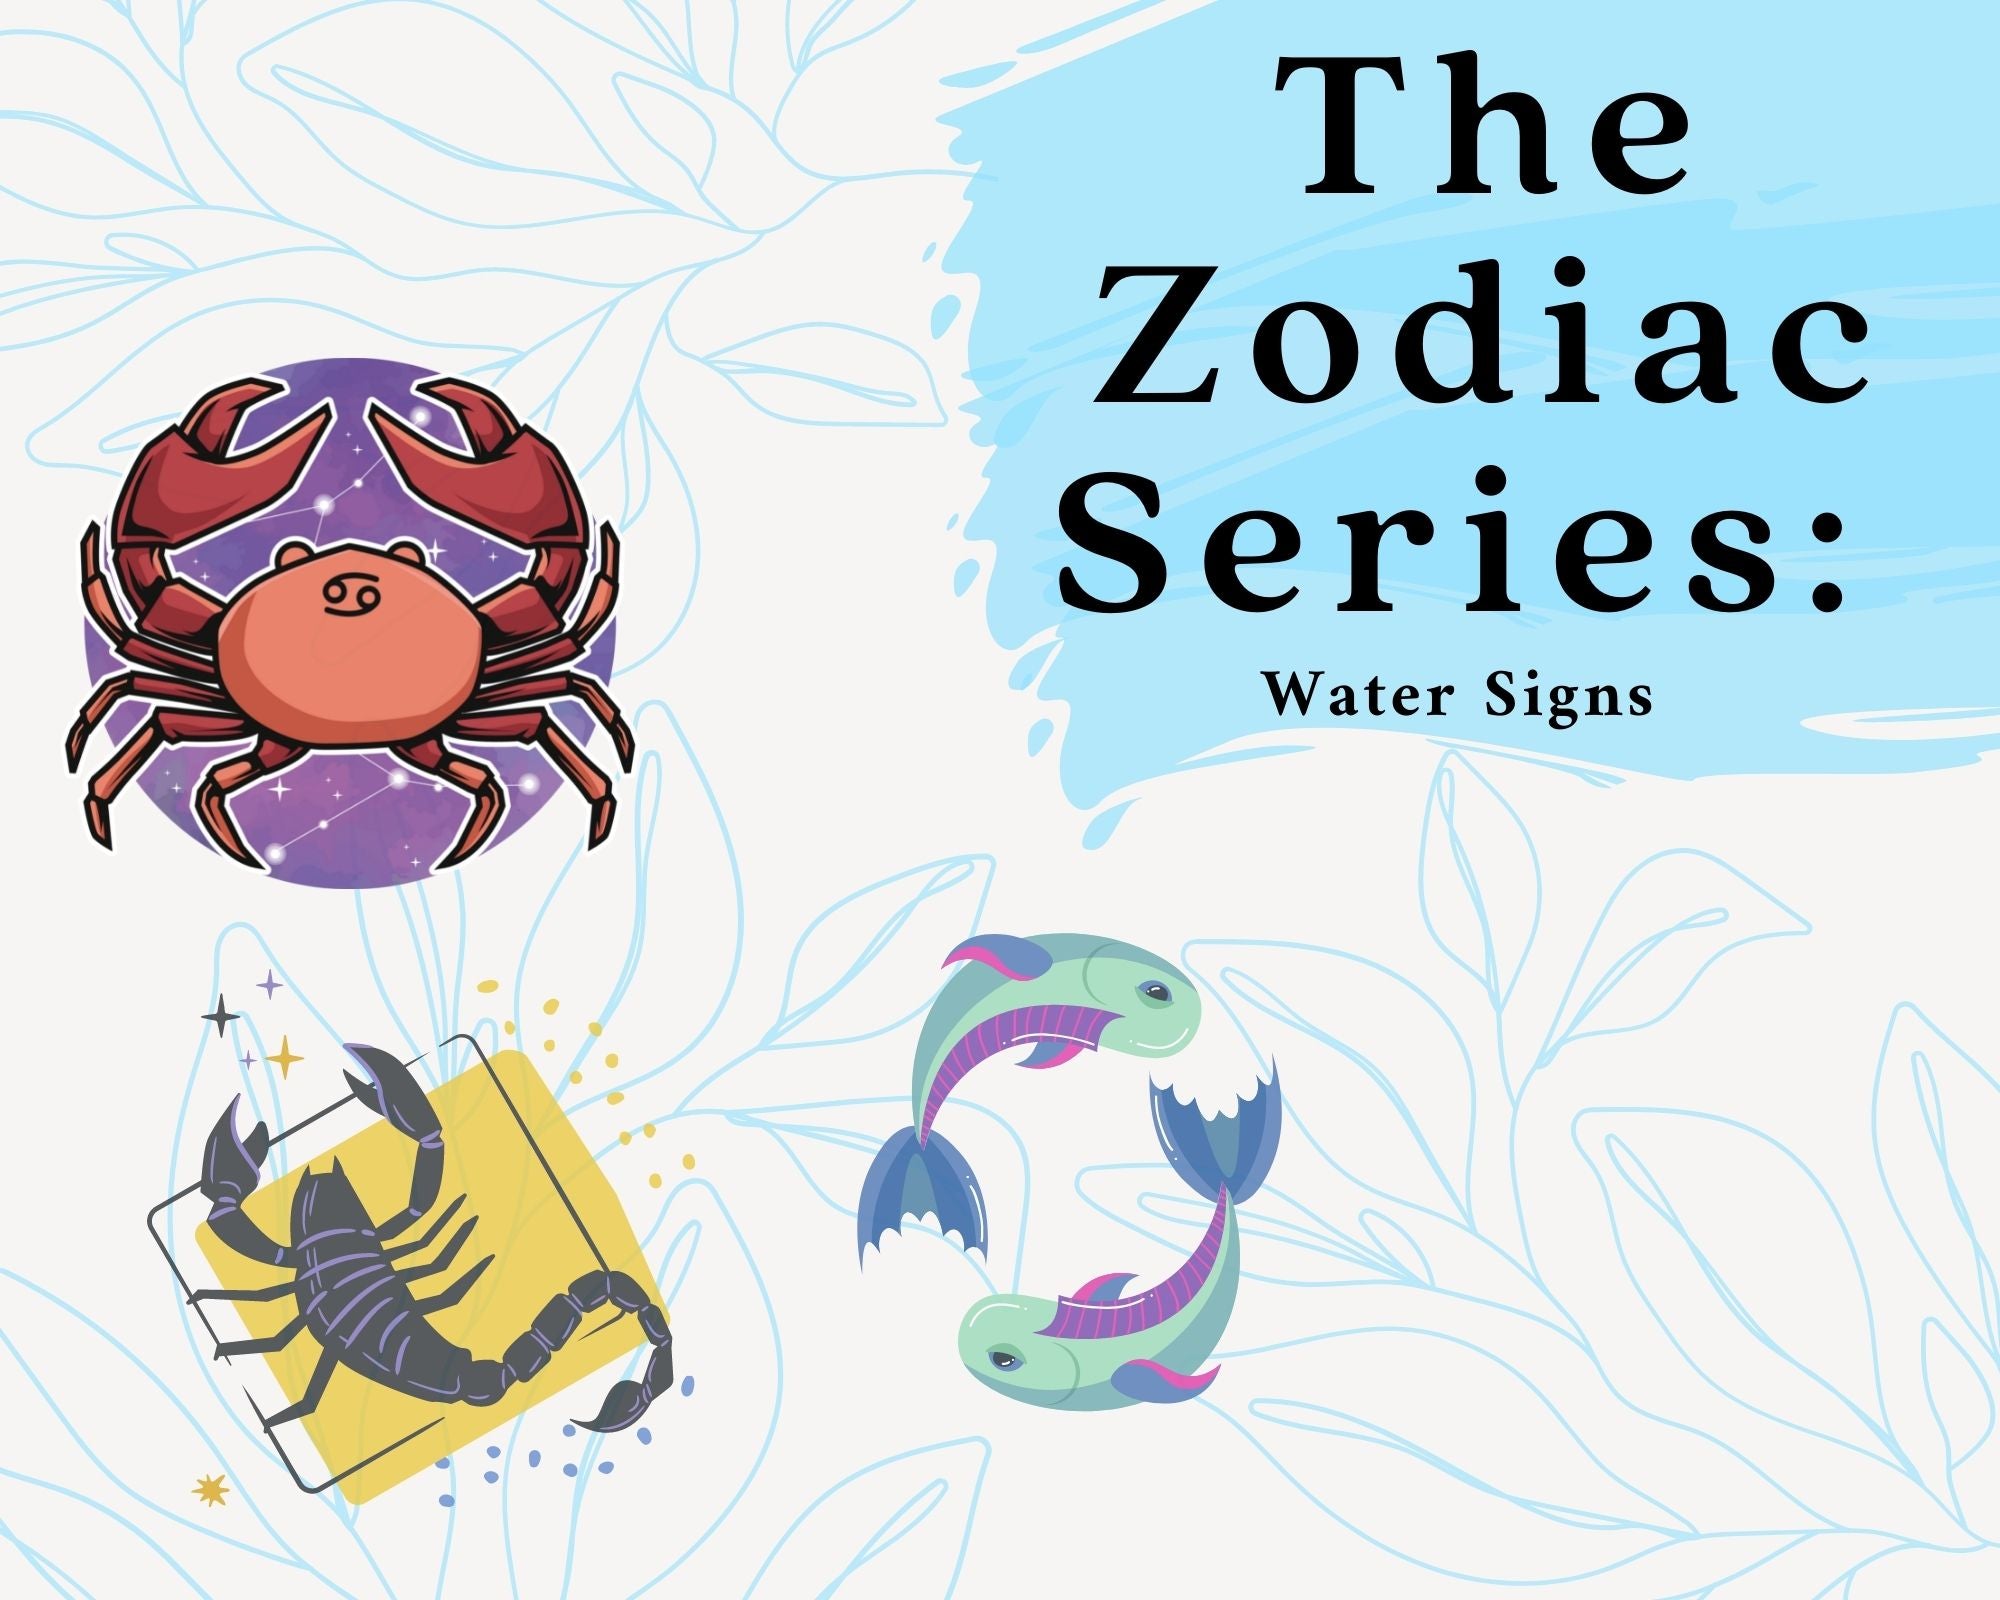 The Zodiac Series: Water Signs